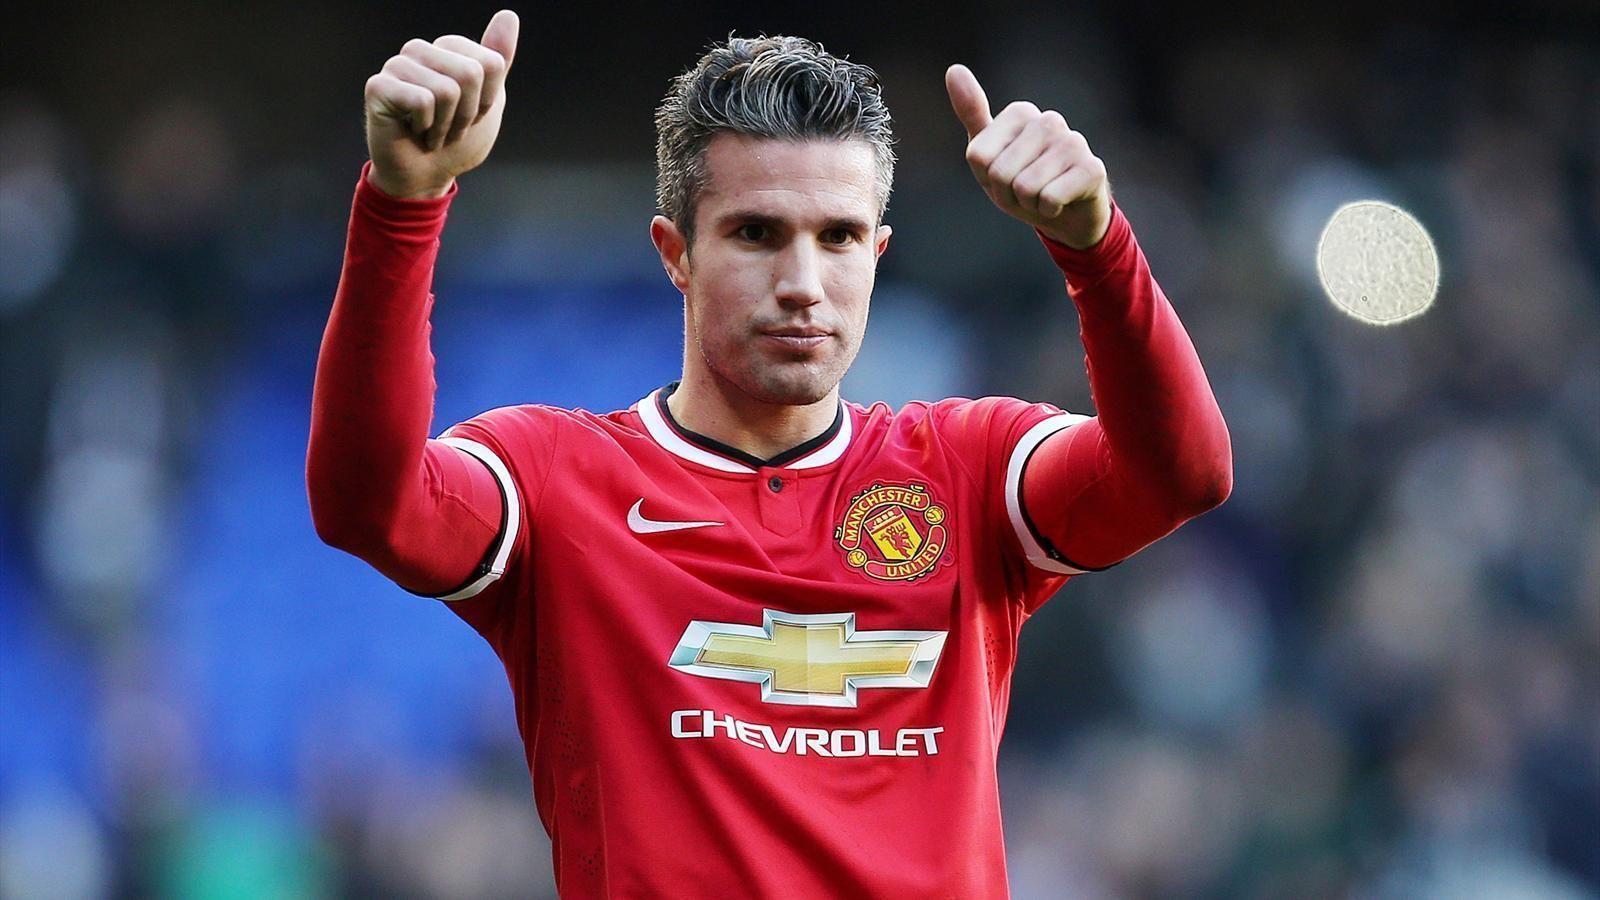 Robin van Persie to join Fenerbahçe from Manchester United